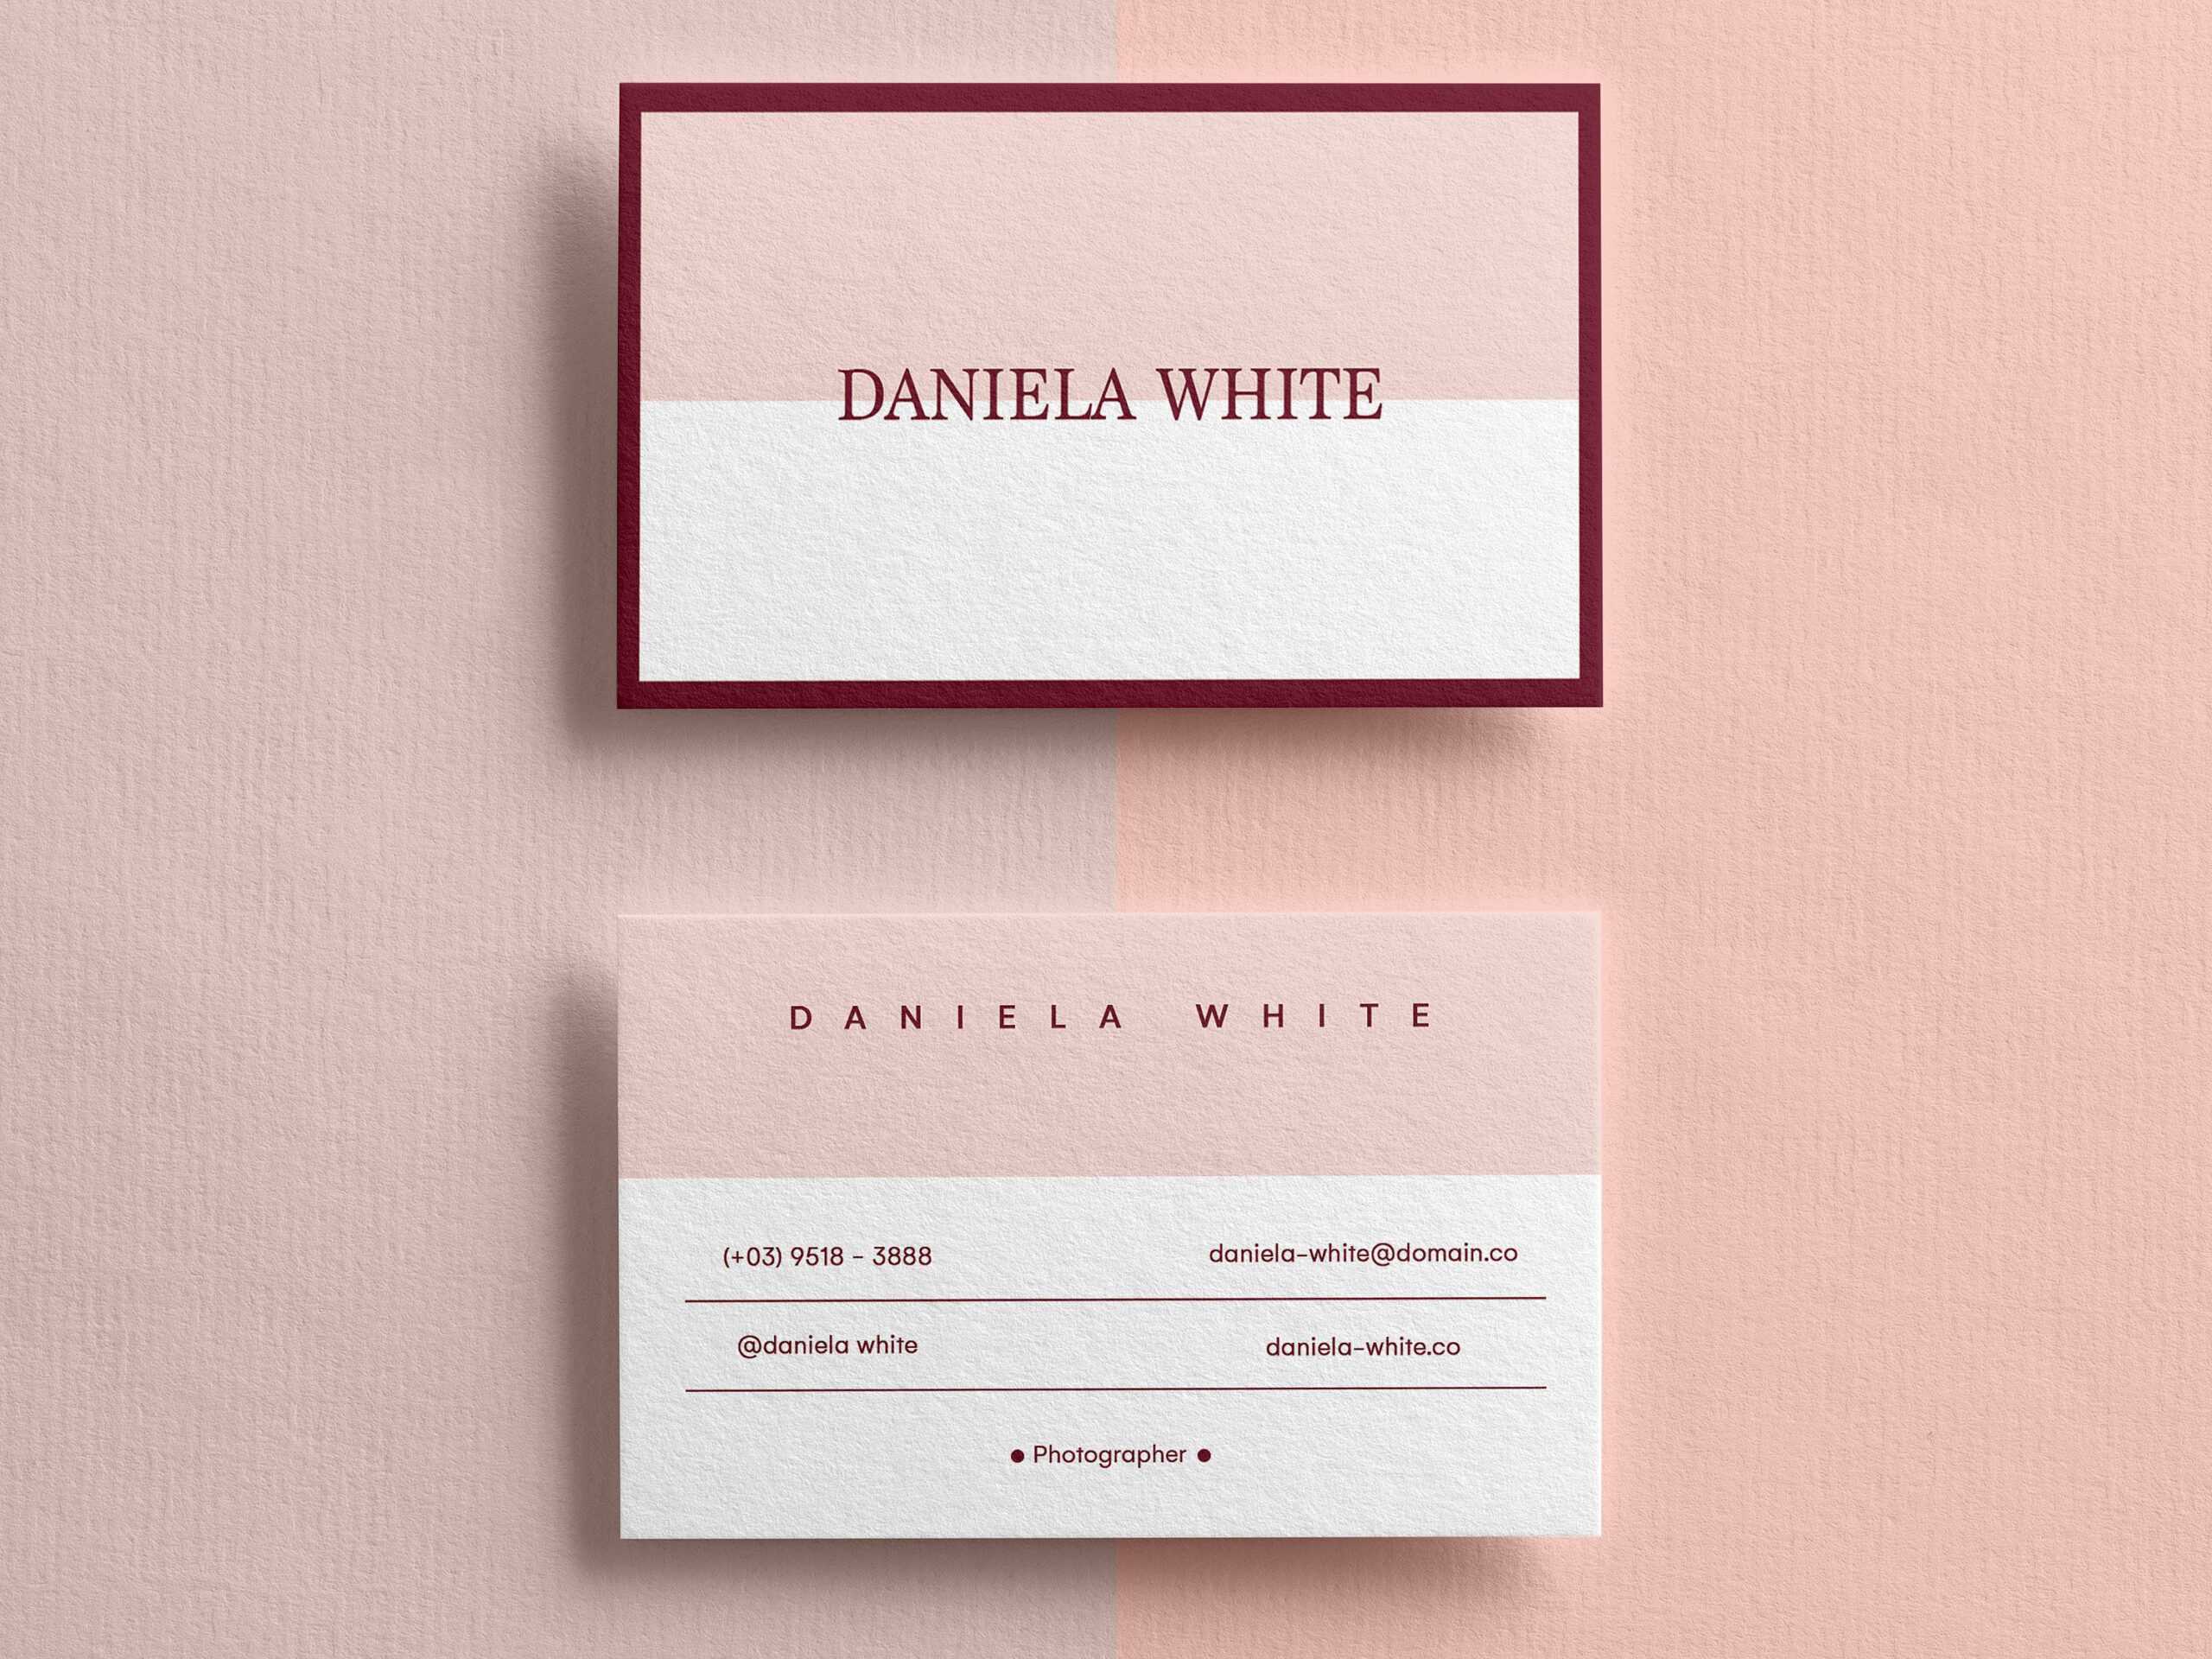 008 Business Card Template Photoshop Fascinating Ideas Blank With Regard To Business Card Template Photoshop Cs6